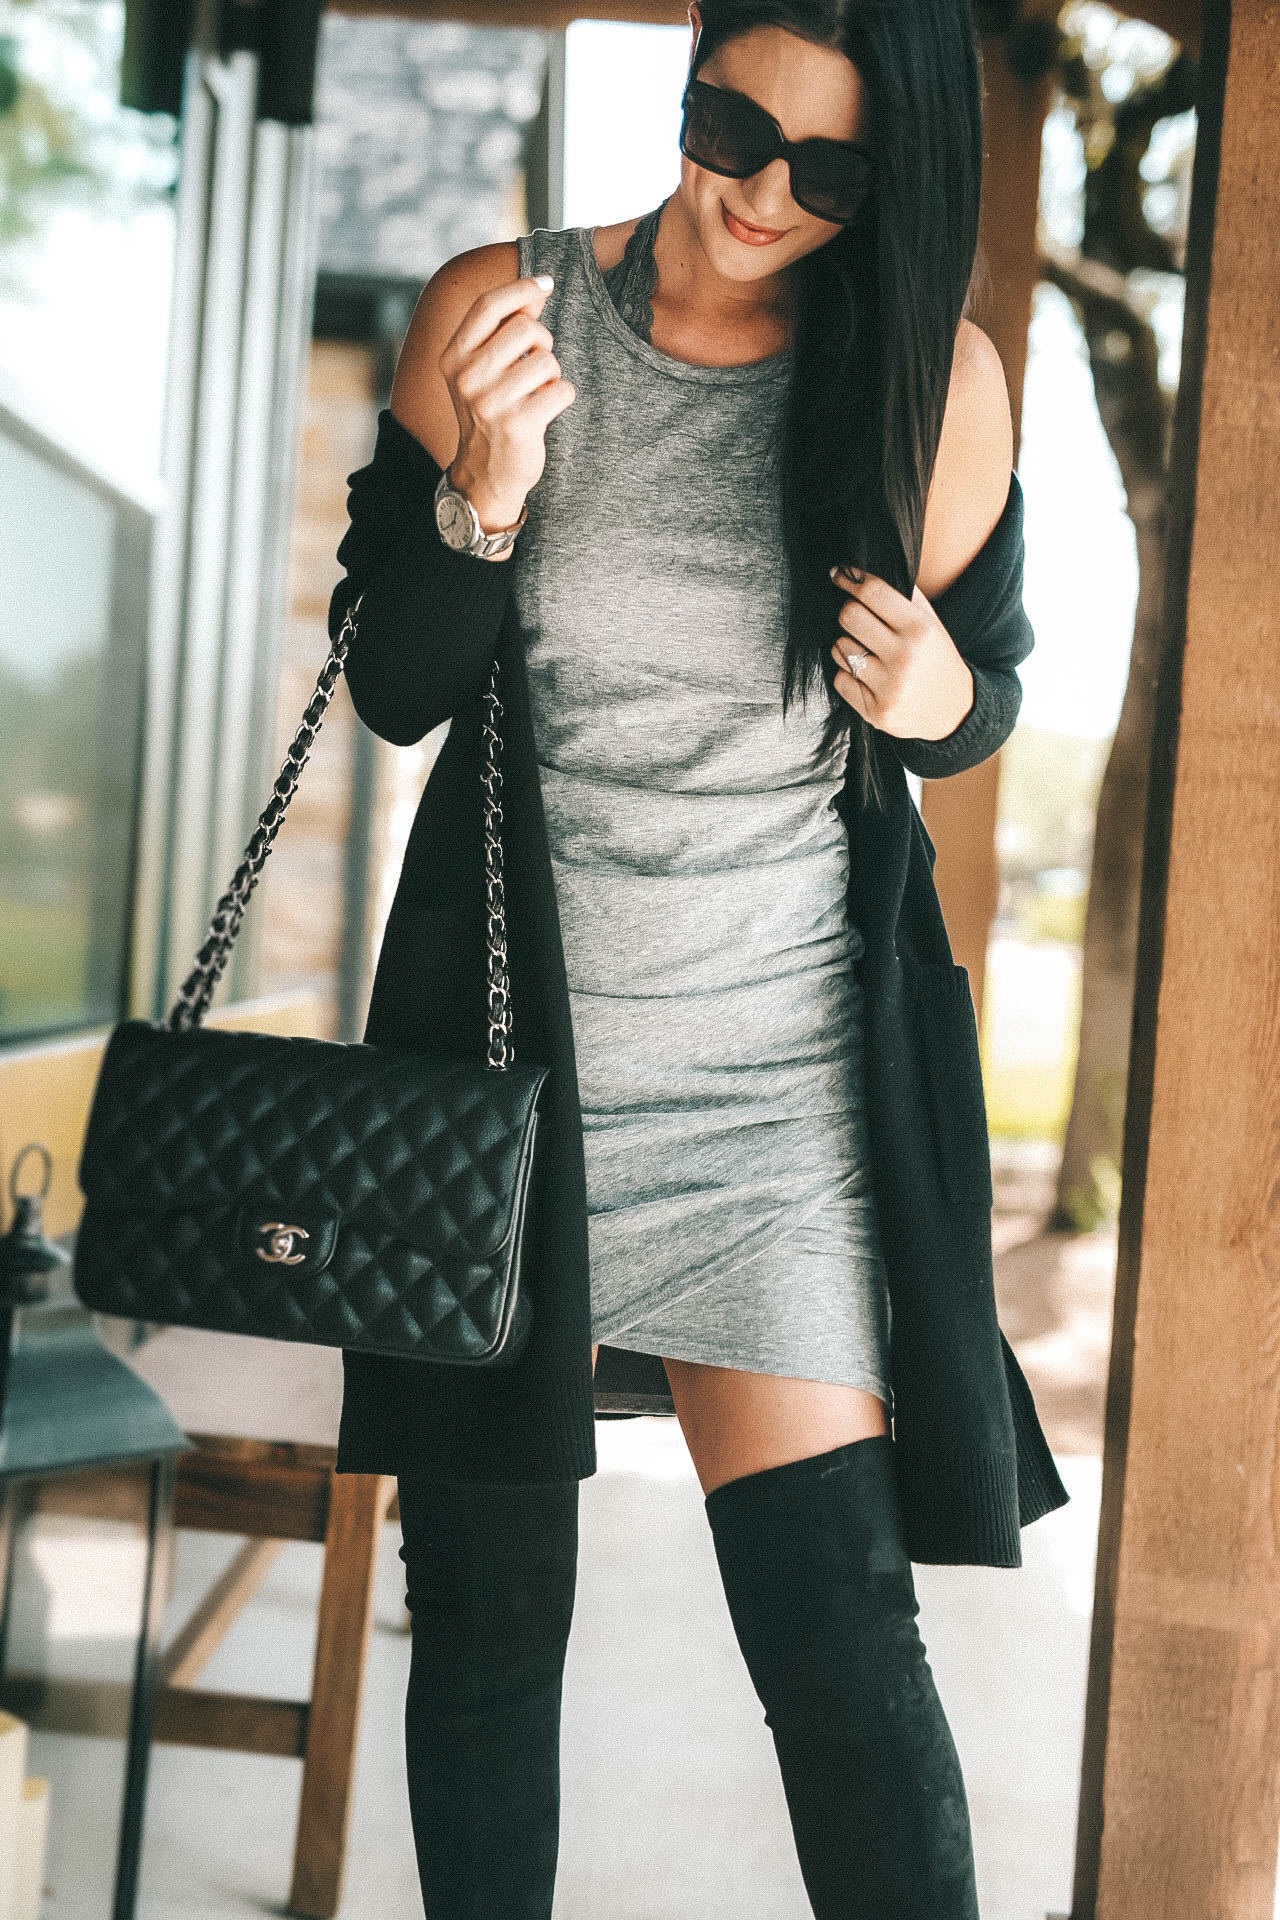 DTKAustin shares her must have cashmere from the NSALE Nordstrom Anniversary Sale. Starting with this Vince cashmere cardigan, Steve Madden OTK Over the Knee boots and Leith body-con dress. Must Have Cashmere Pieces | 2018 Nordstrom Anniversary Sale || Dressed to Kill #style #fashion #womensoutfit #cashmere #cashmeresweater #cashmerescarf #cashmerecardigan #dtkaustin - {Must Have Cashmere from the Nordstrom Anniversary Sale + Giveaway} featured by popular Austin fashion blogger Dressed to Kill